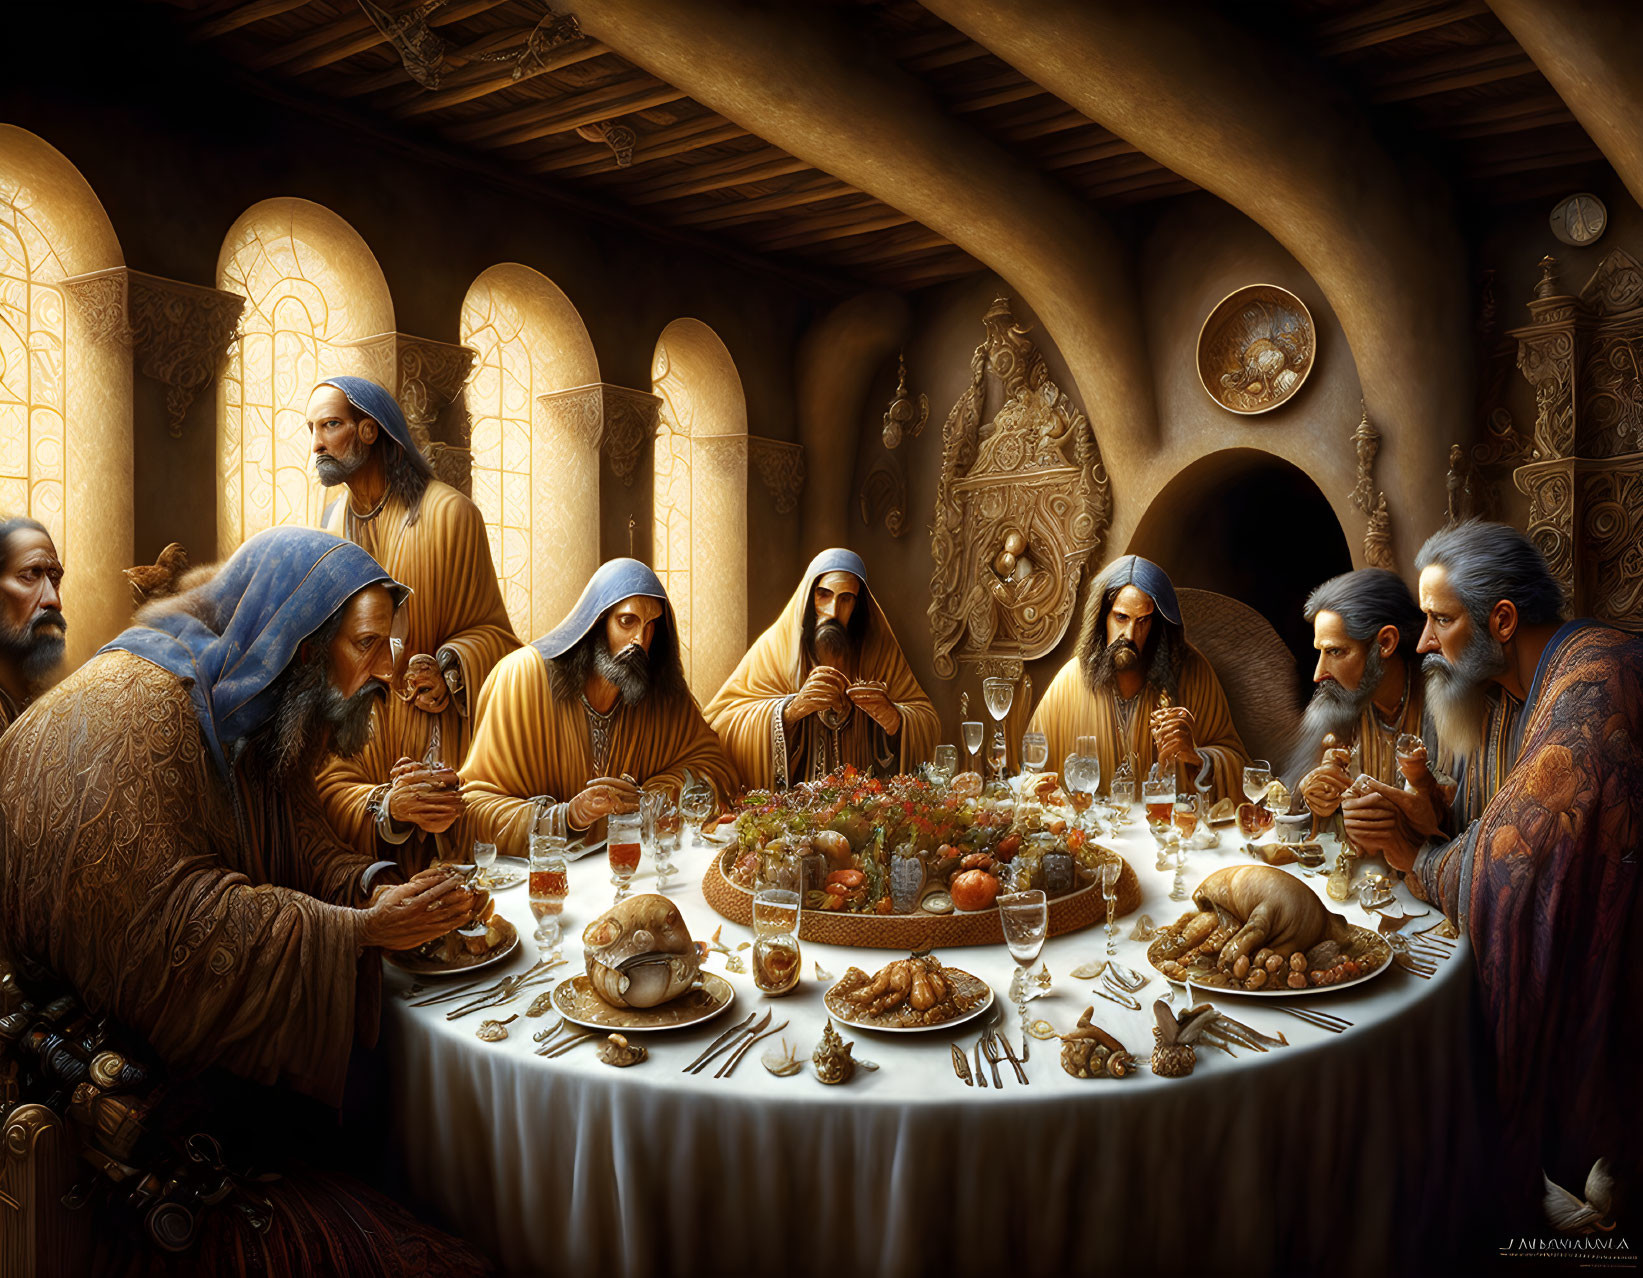 Historical figures in robes at ornate round table with food talking.